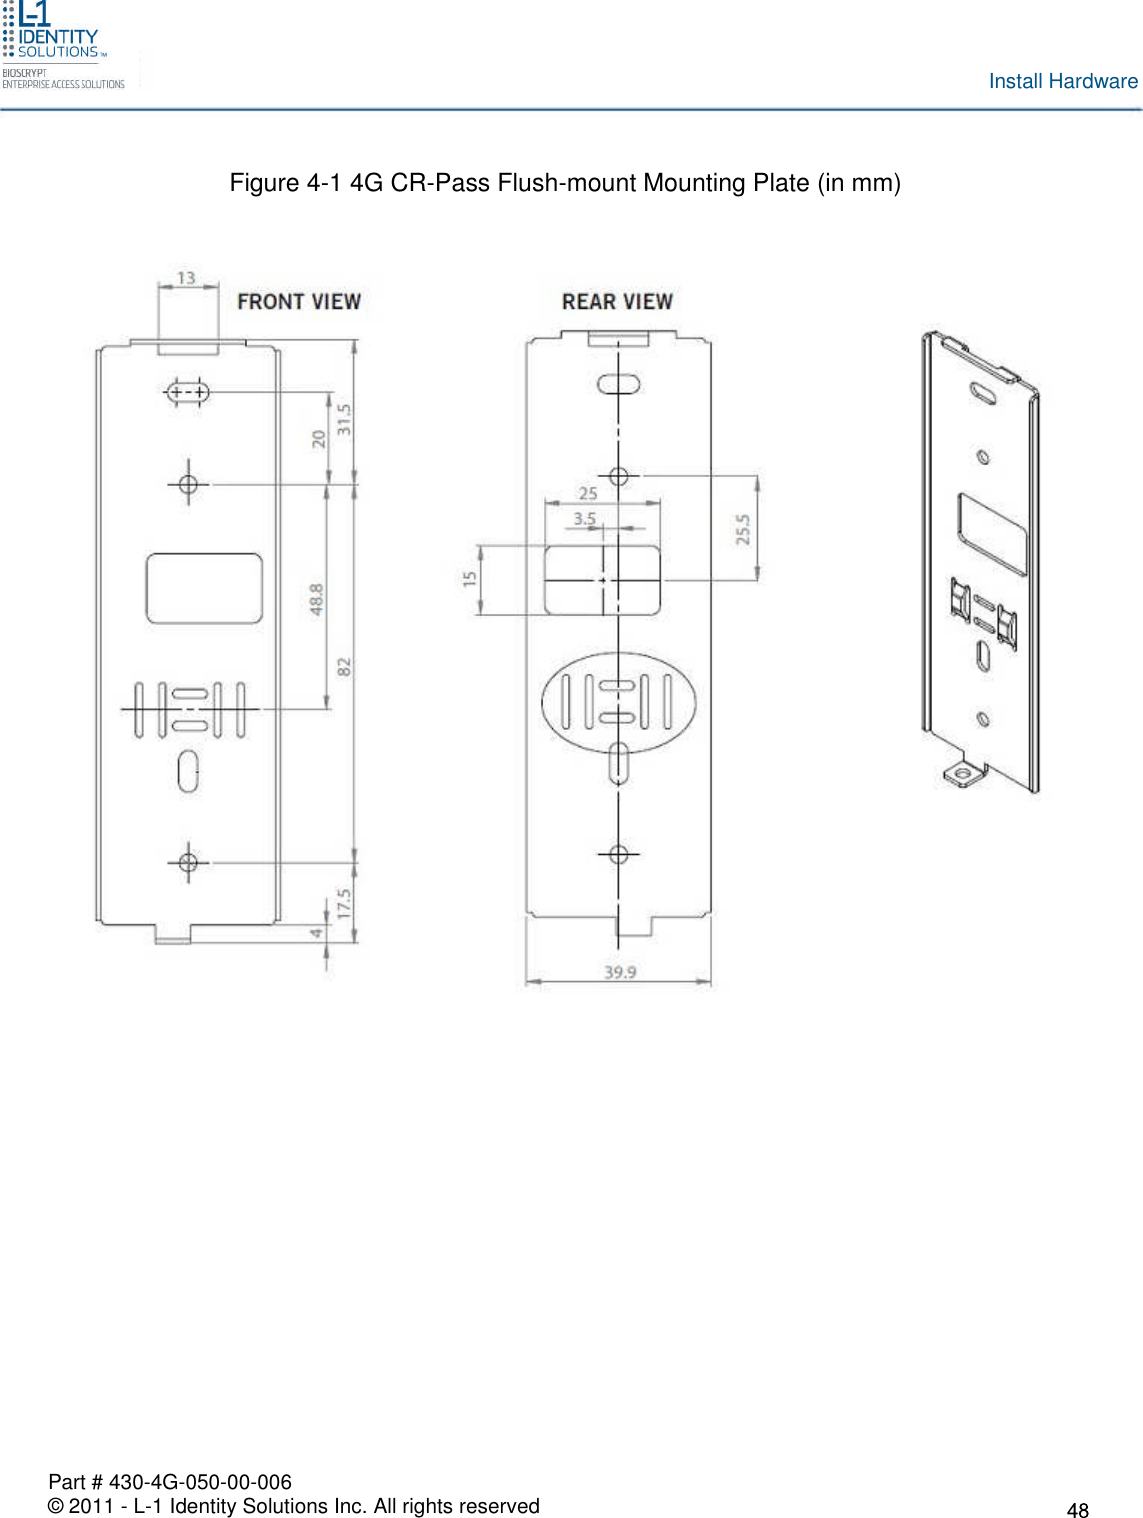 Part # 430-4G-050-00-006© 2011 - L-1 Identity Solutions Inc. All rights reservedInstall HardwareFigure 4-1 4G CR-Pass Flush-mount Mounting Plate (in mm)